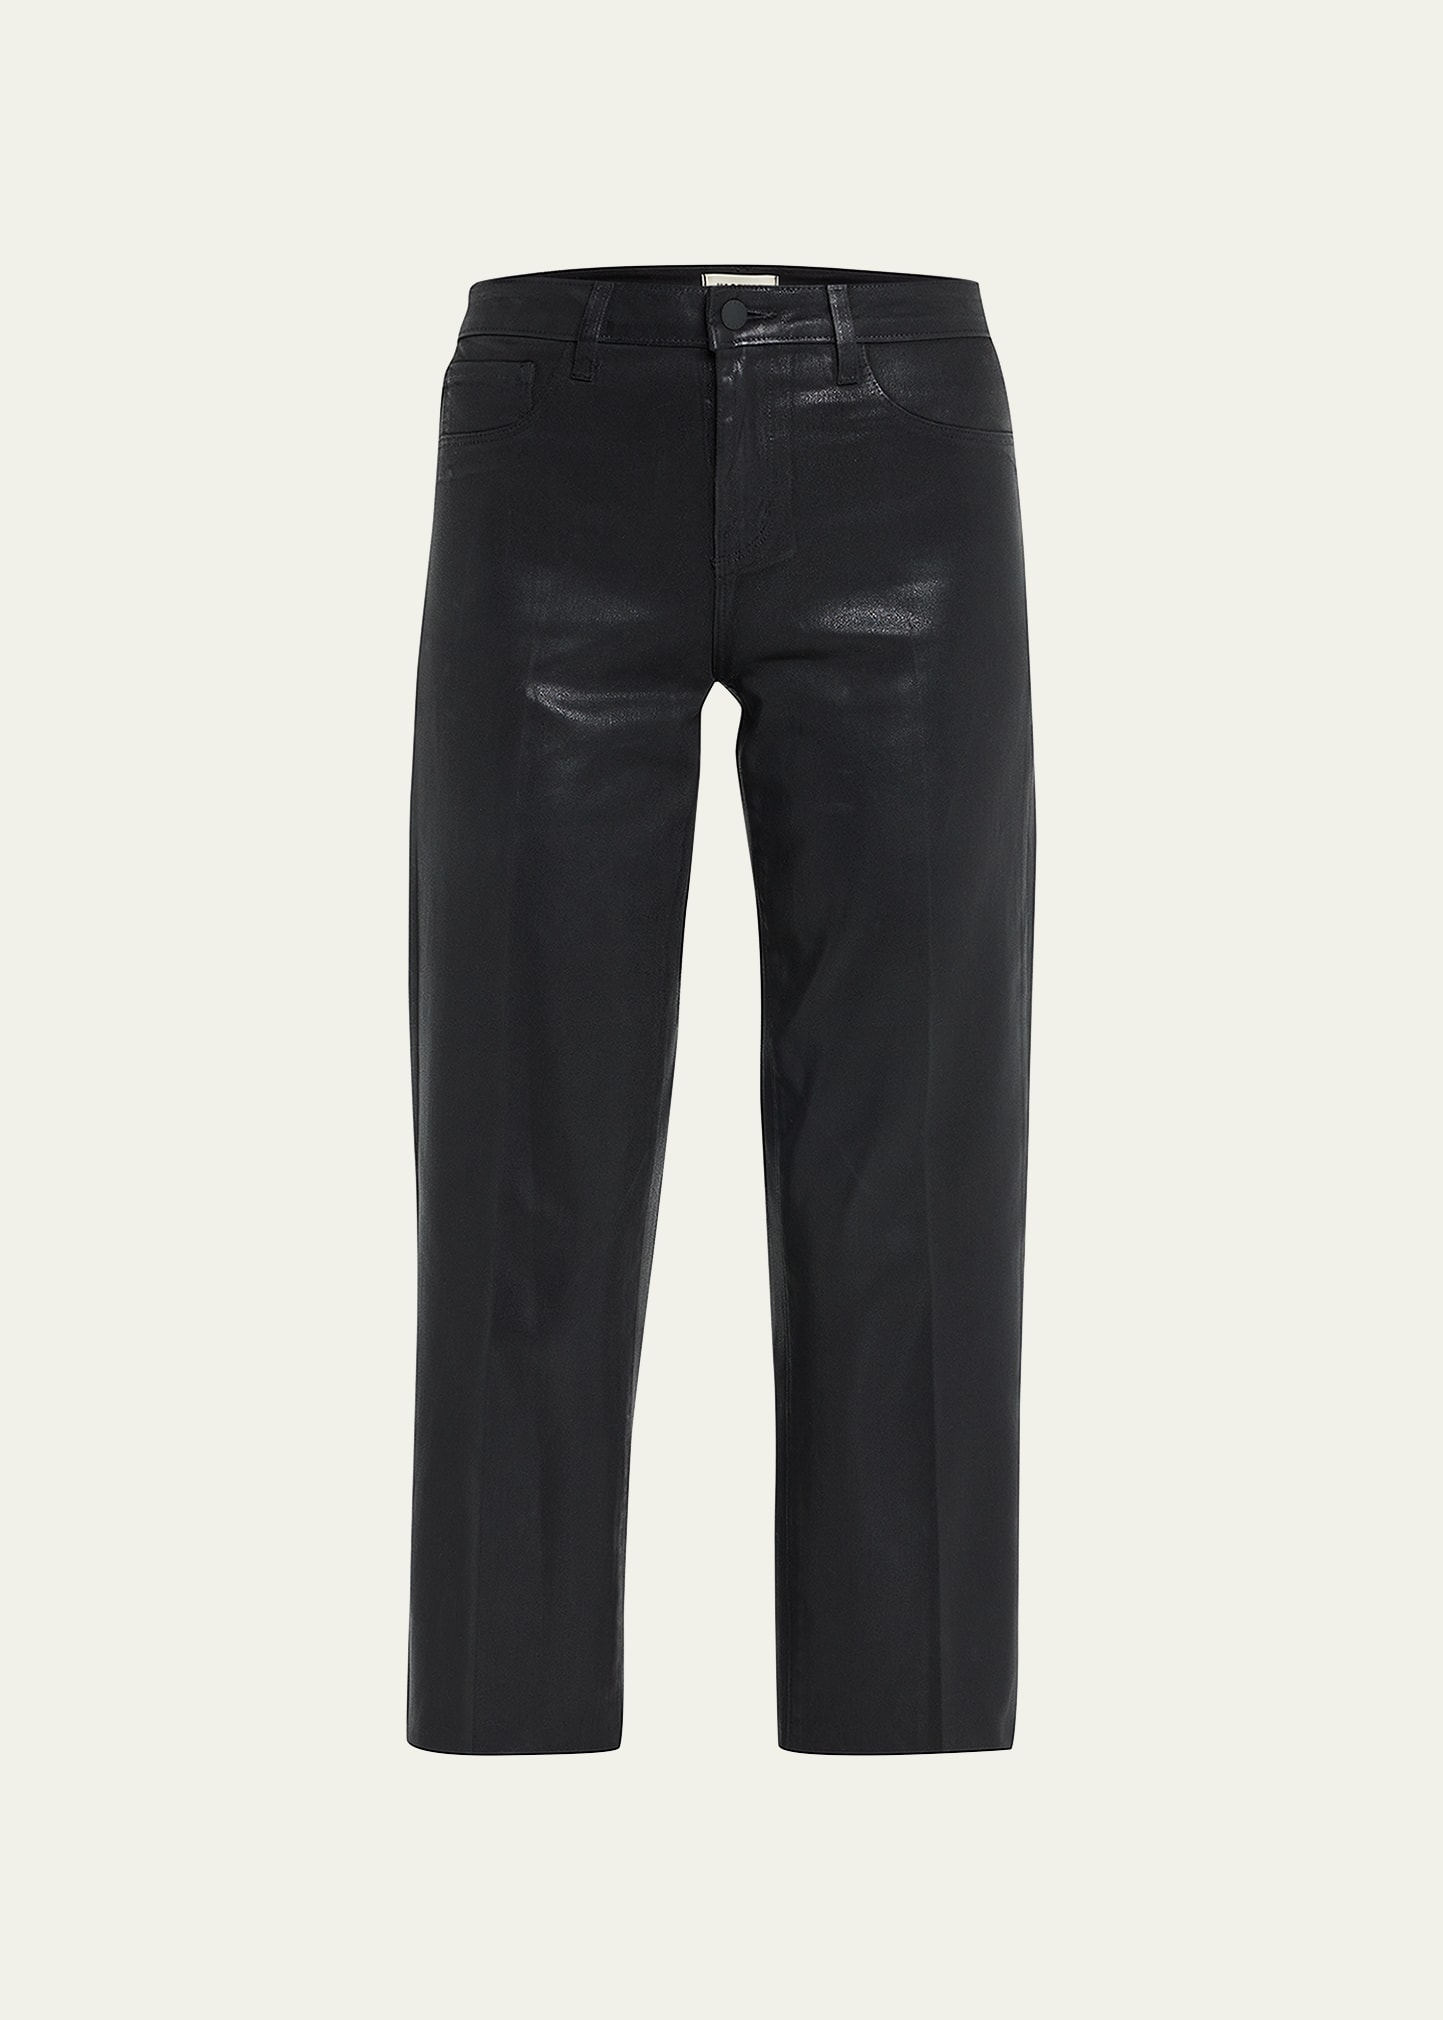 L'Agence Wanda High Rise Cropped Wide Jeans